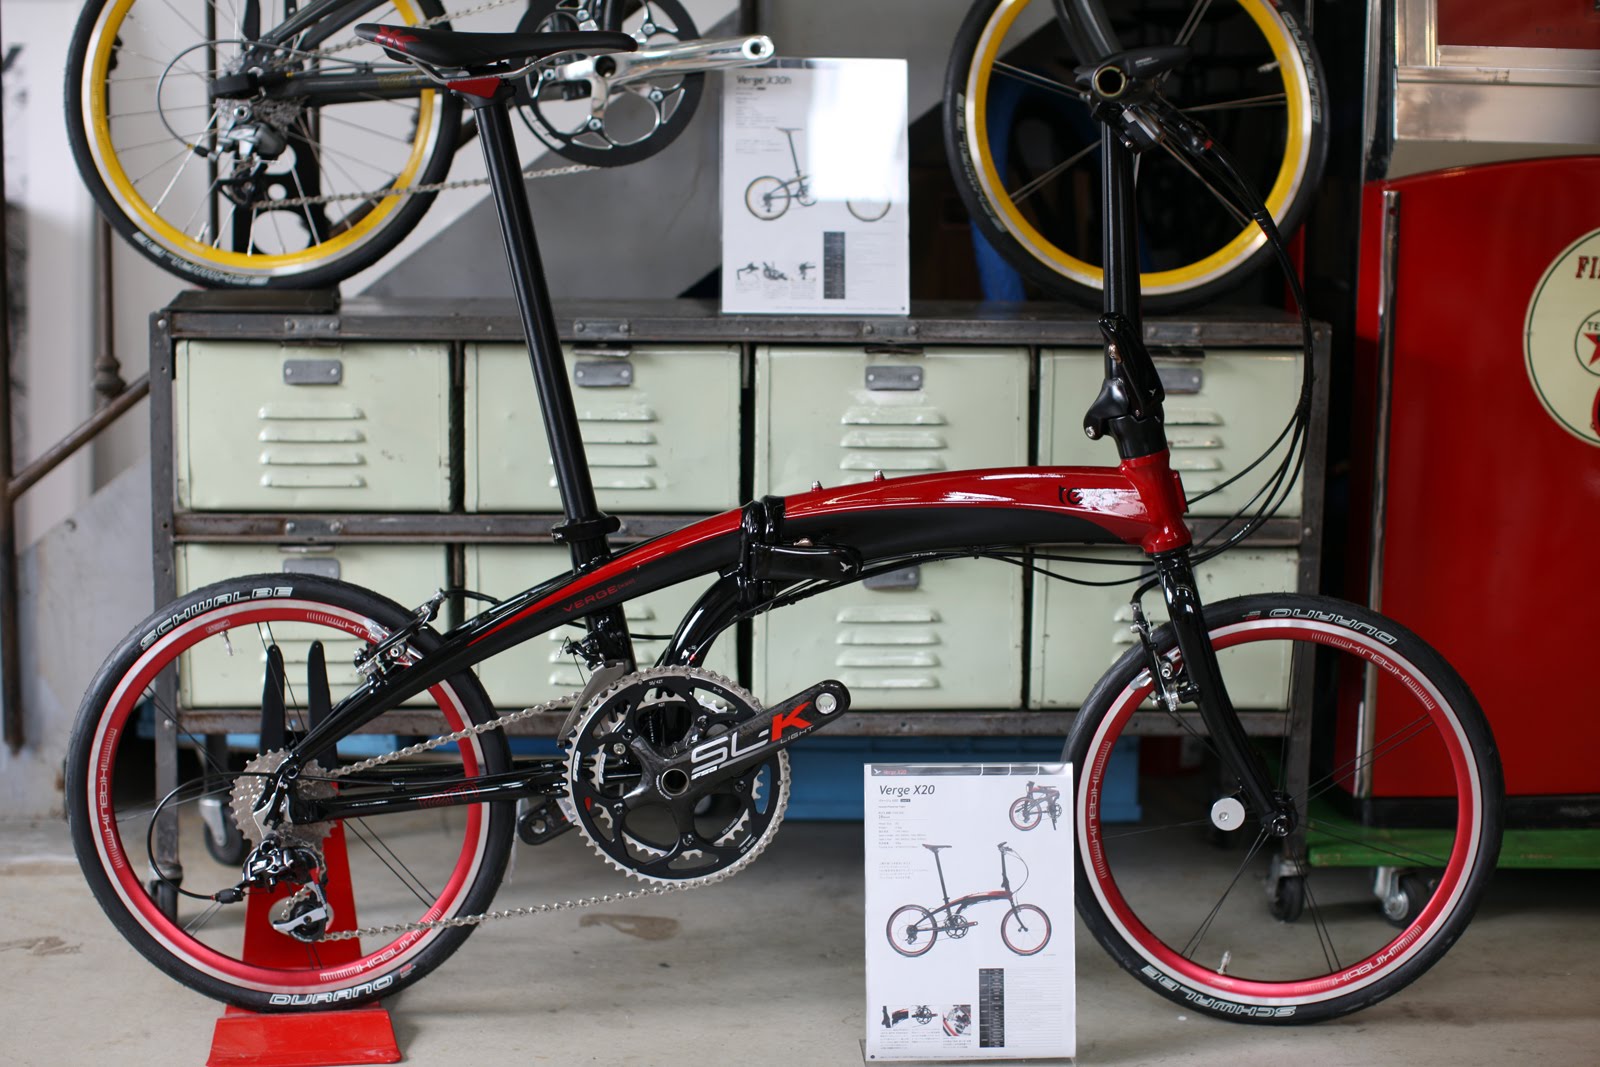 Tern Bicycles Japan Official Blog: Tern展示発表会レポート